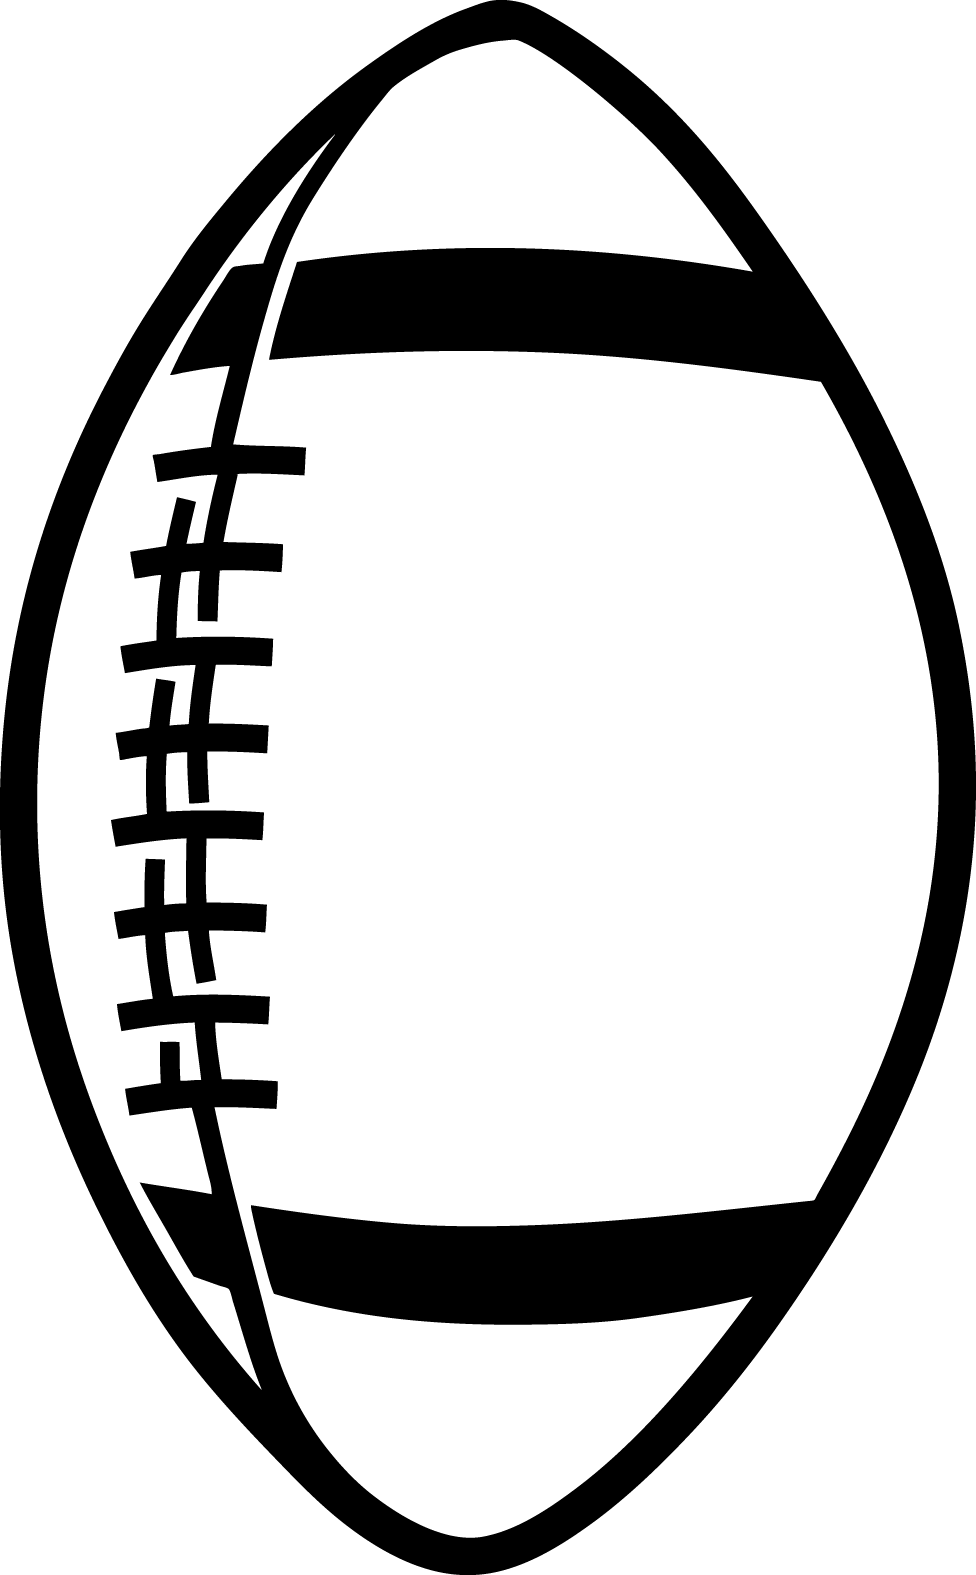 Football Outline Image | Clipart library - Free Clipart Images